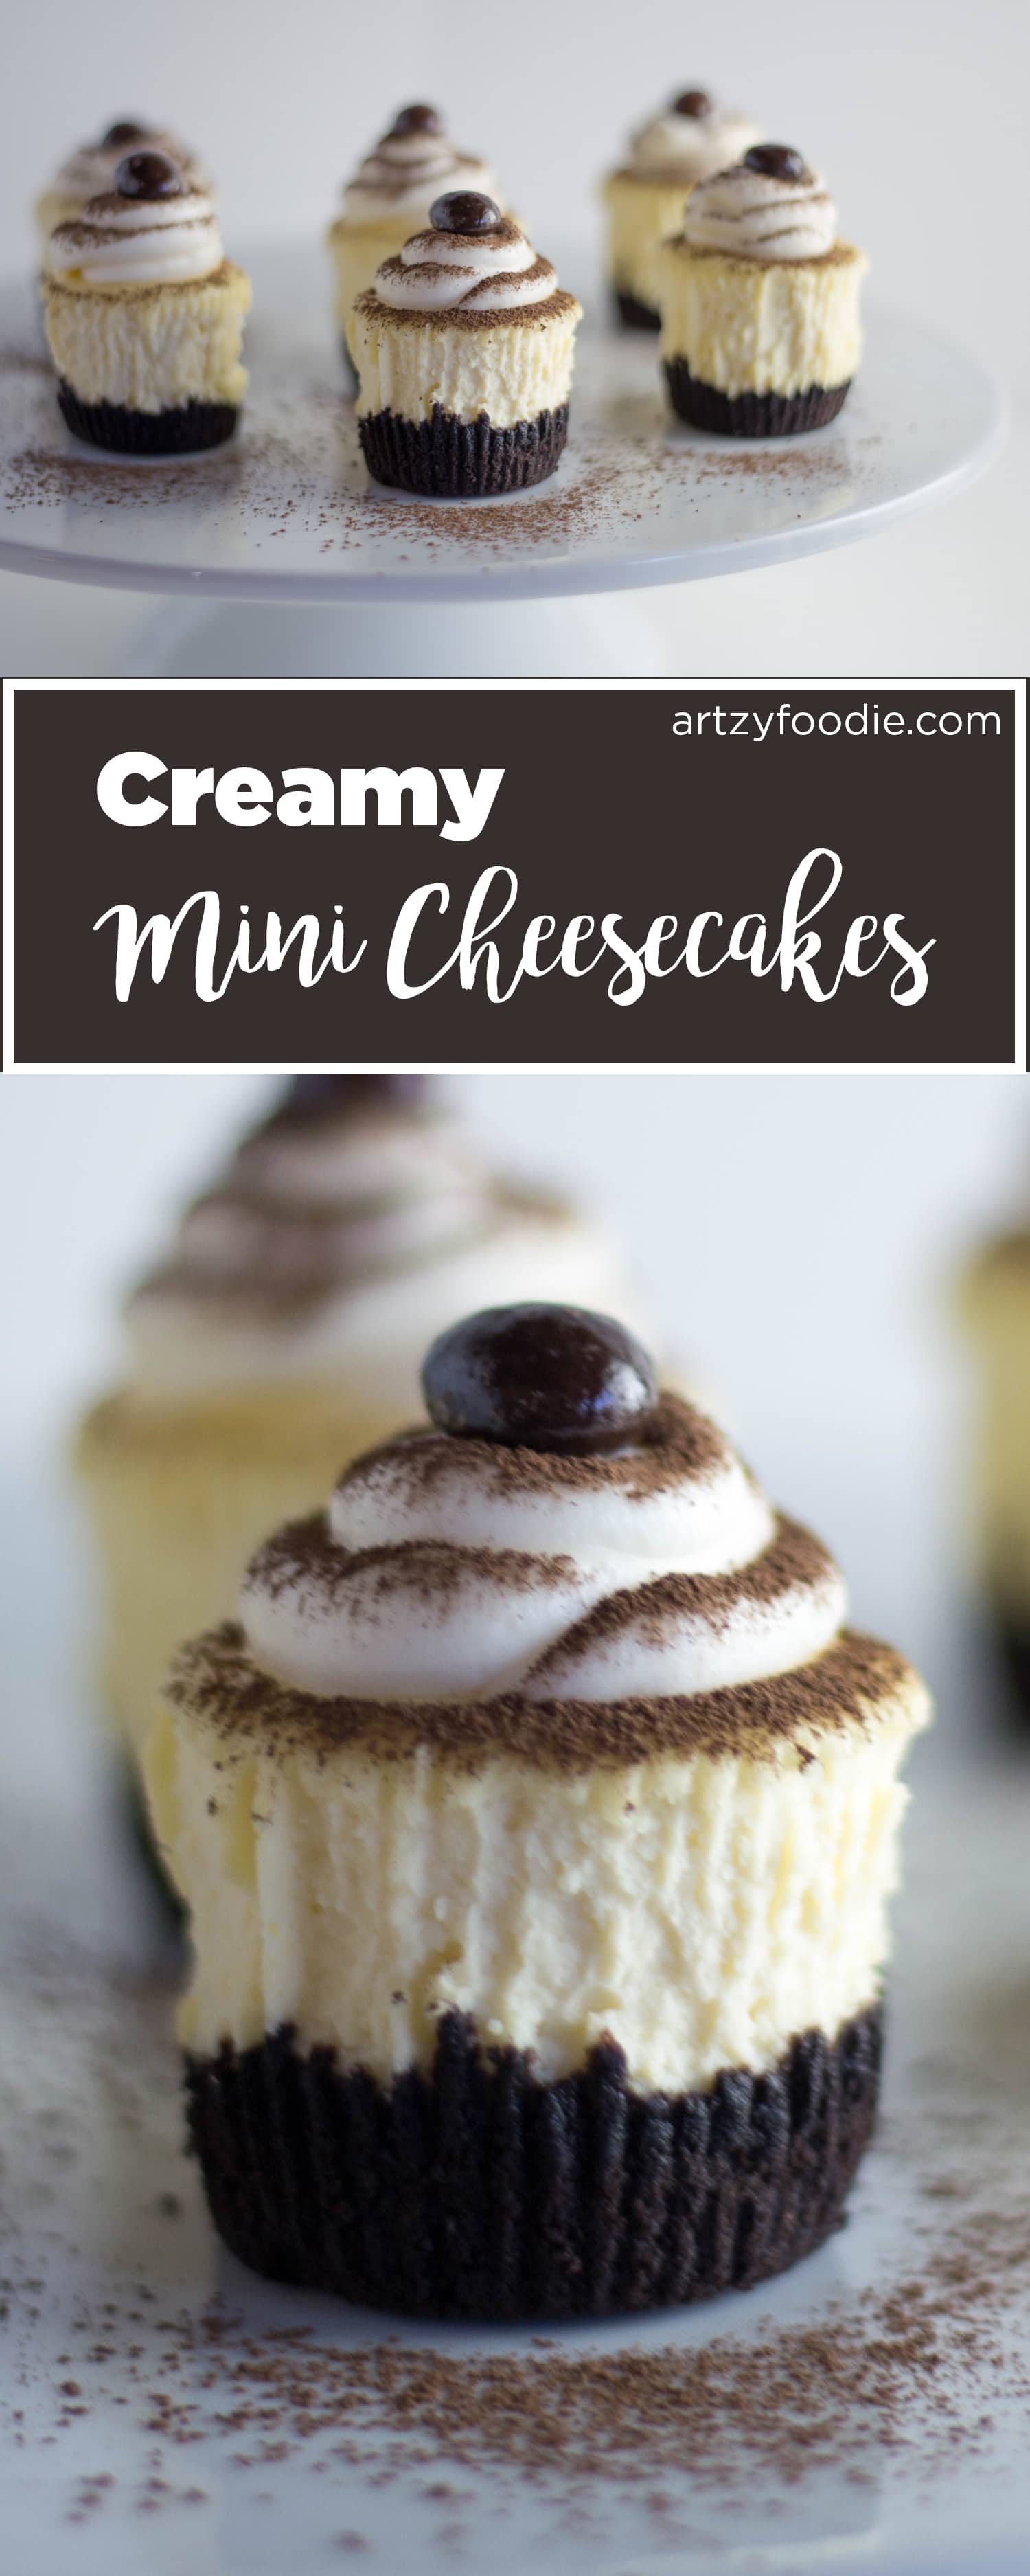 Creamy mini cheesecakes are a delicious hand held dessert that are perfect for holiday entertaining! |artzy foodie.com|